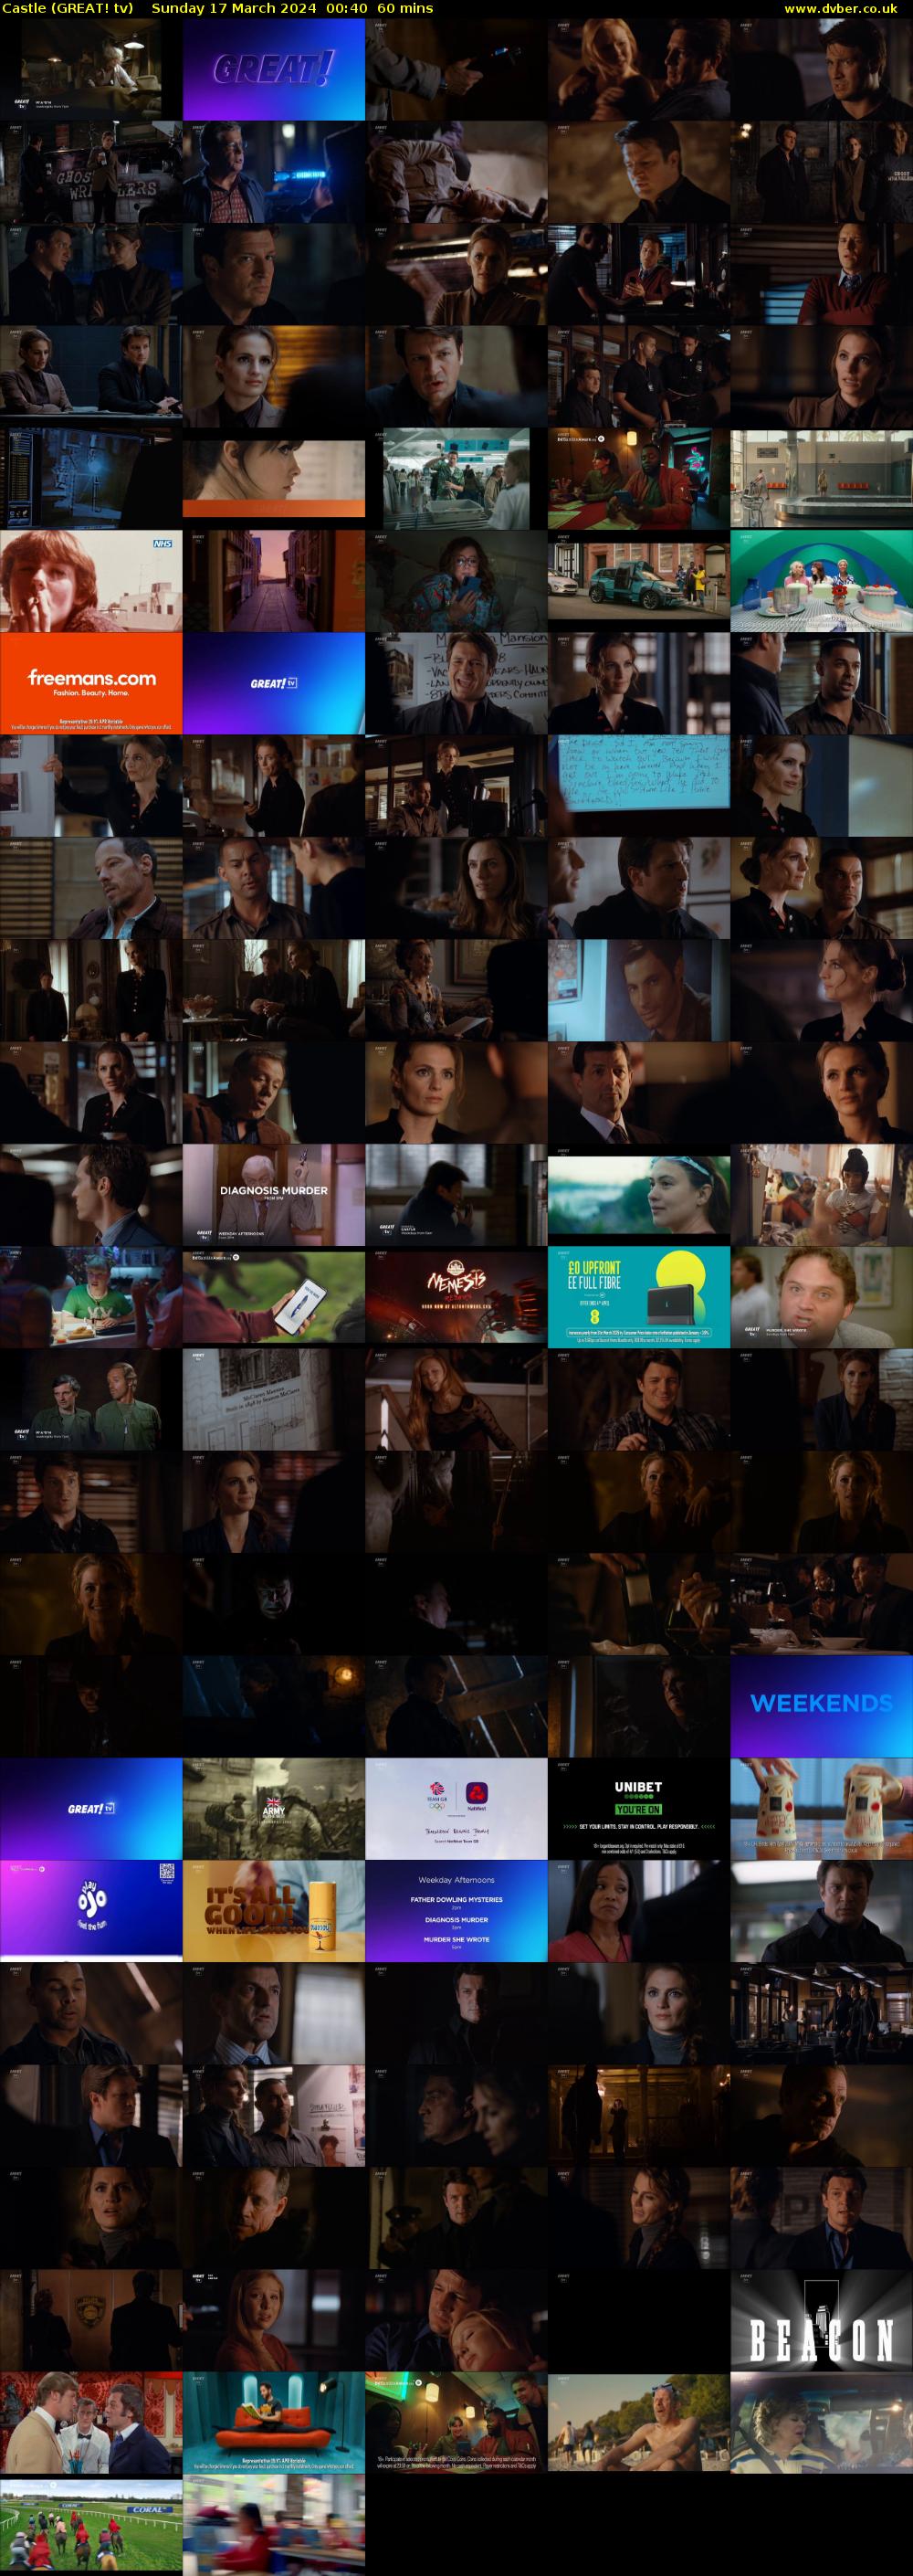 Castle (GREAT! tv) Sunday 17 March 2024 00:40 - 01:40